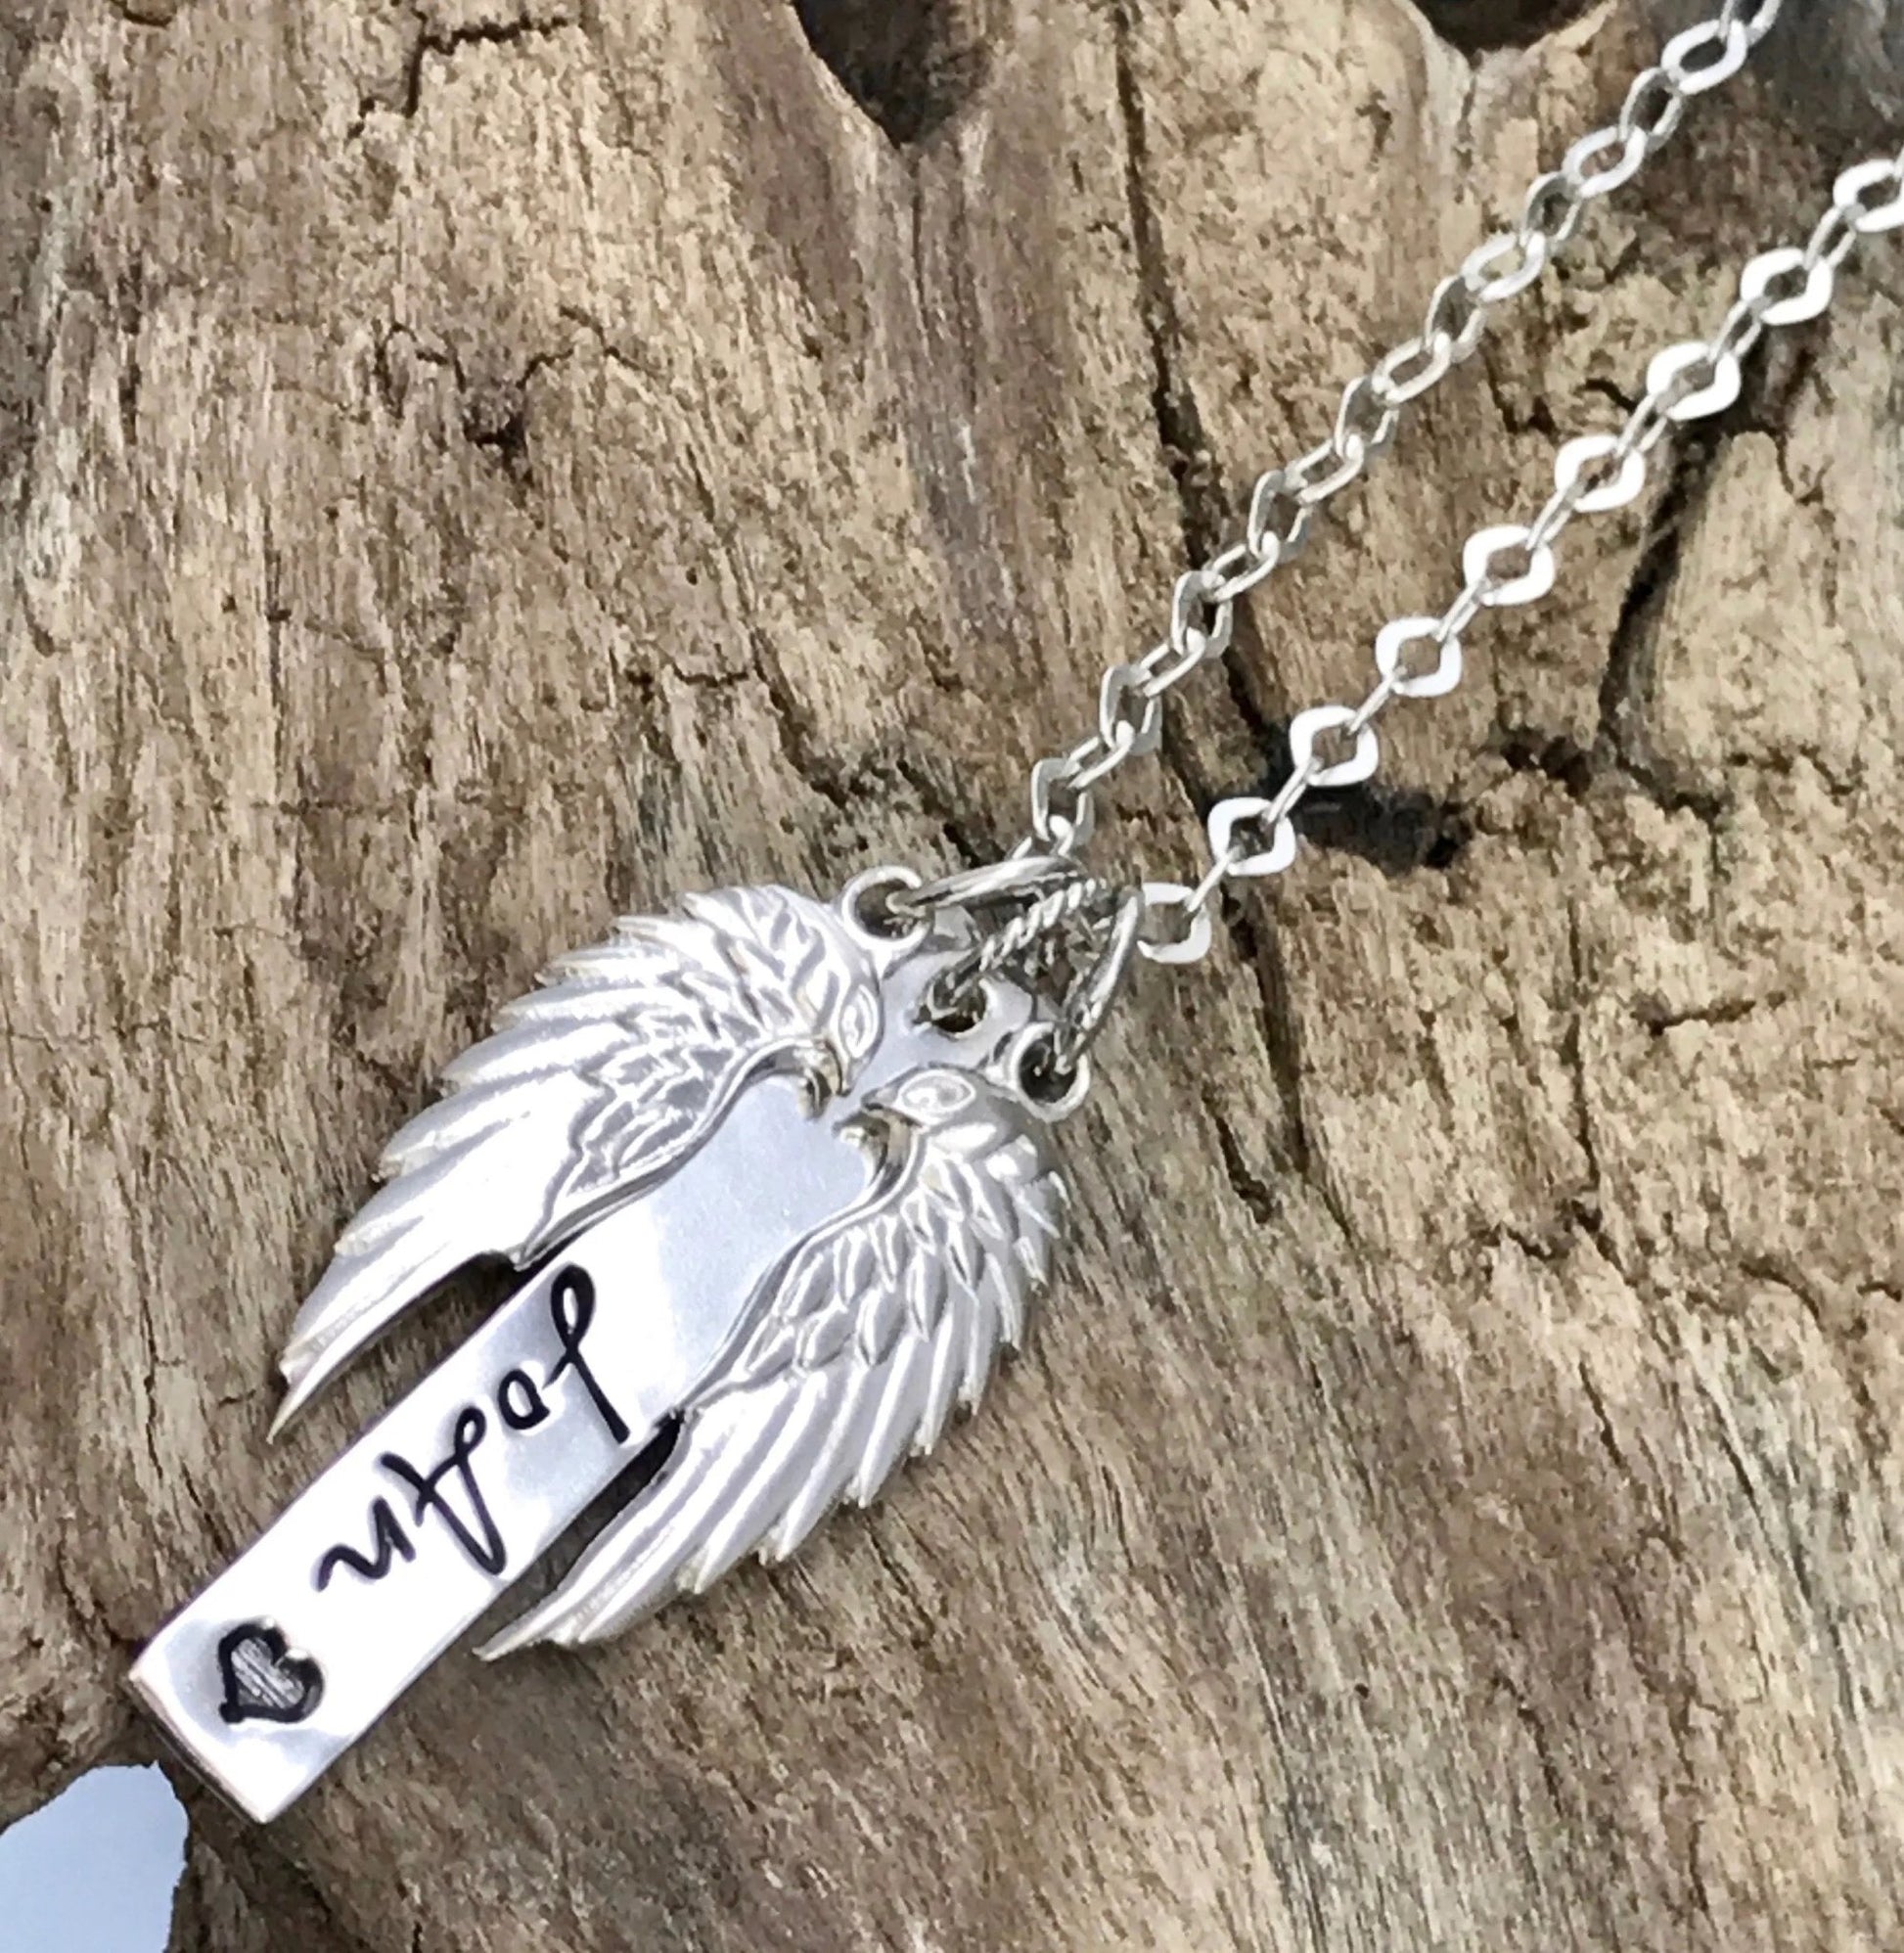  Personalized Angel Wing Necklace Sterling Silver Mothers Necklace  Initial Necklace Monogram Jewelry Gift for Mom Memorial Jewelry : Handmade  Products